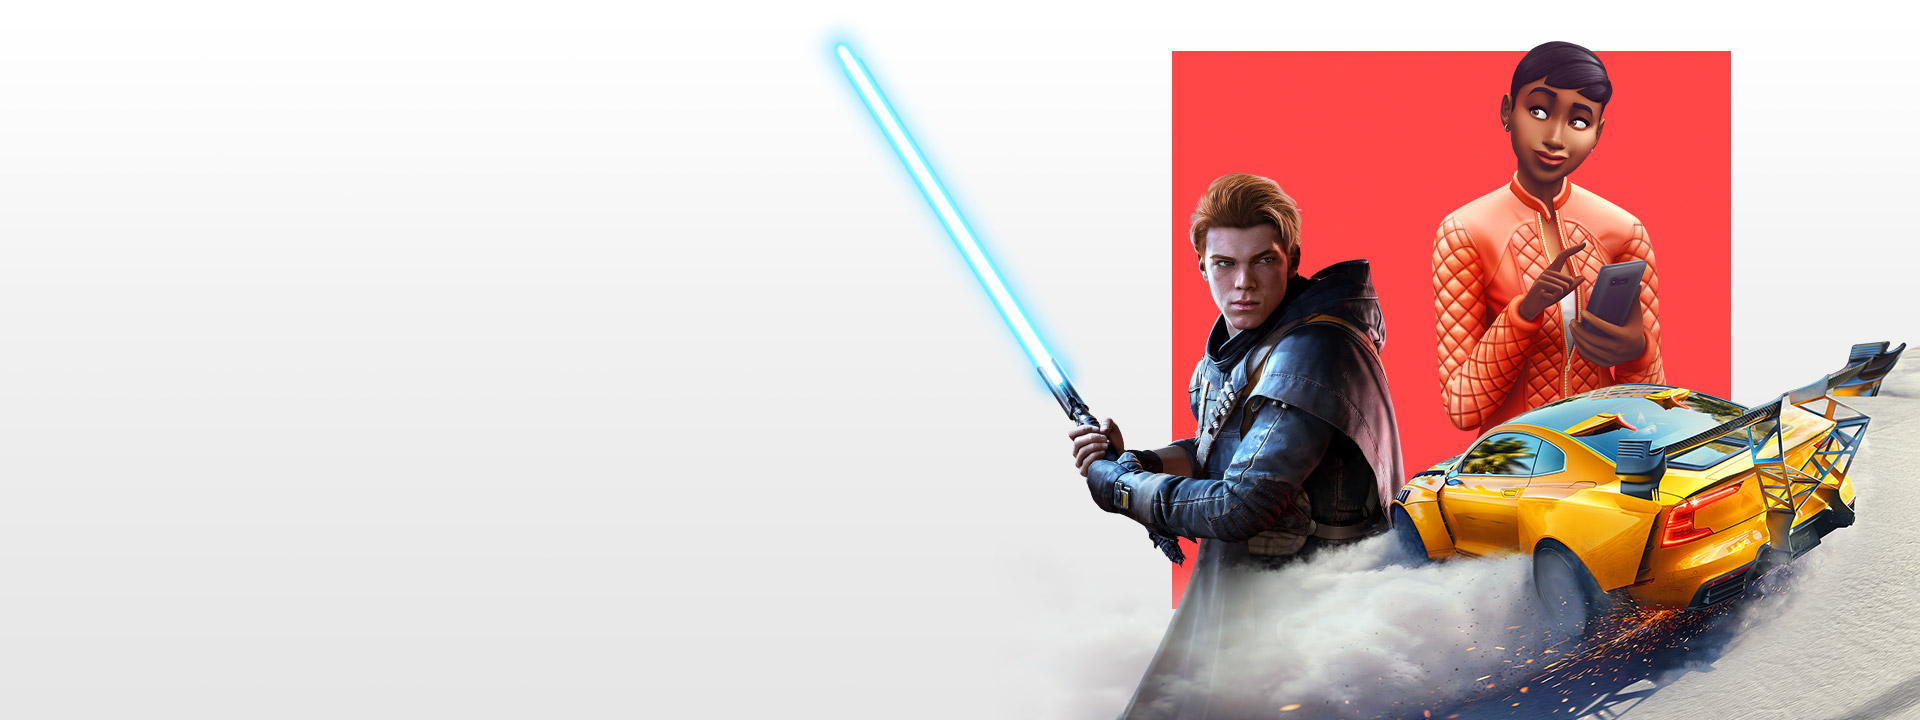 An assortment of characters from different EA games including Star Wars Jedi: Fallen Order, The Sims 4 and Need for Speed Heat.